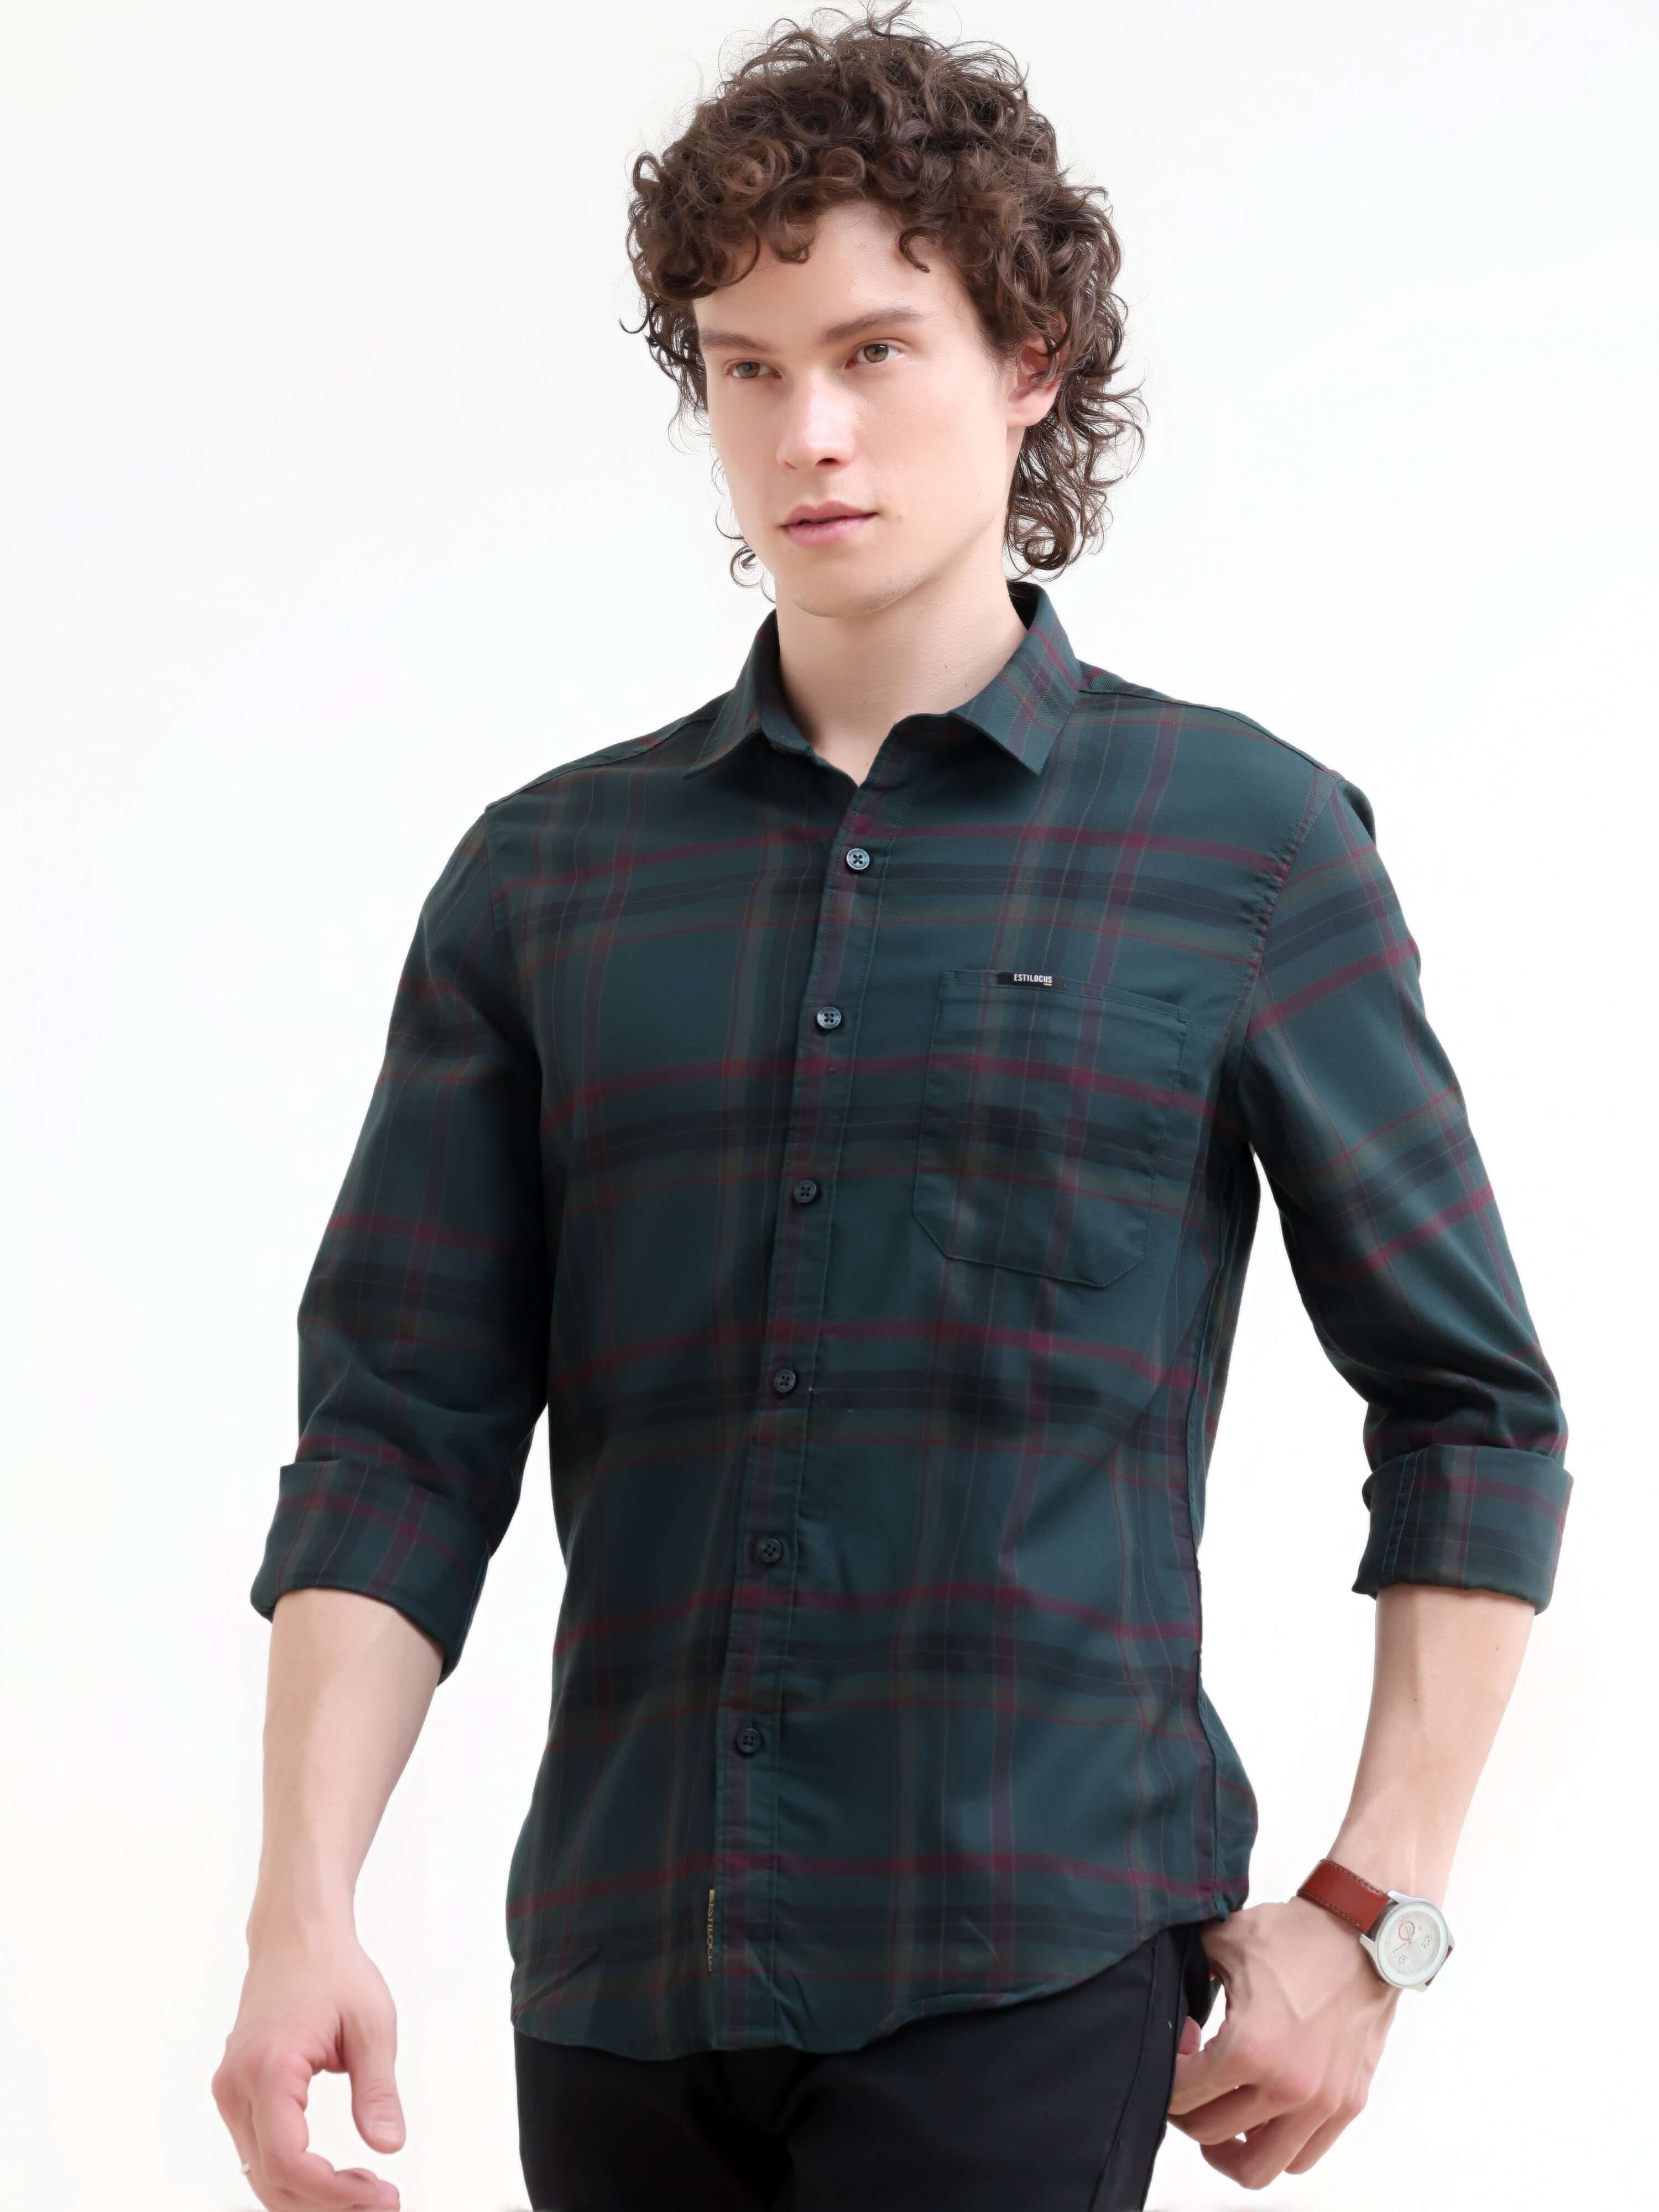 Green Check Shirt | Men's Summer New Arrival shop online at Estilocus. Elevate your style with the Boxlines green tonal check shirt - perfect for summer days & smart-casual evenings. Shop the latest in men's fashion now!